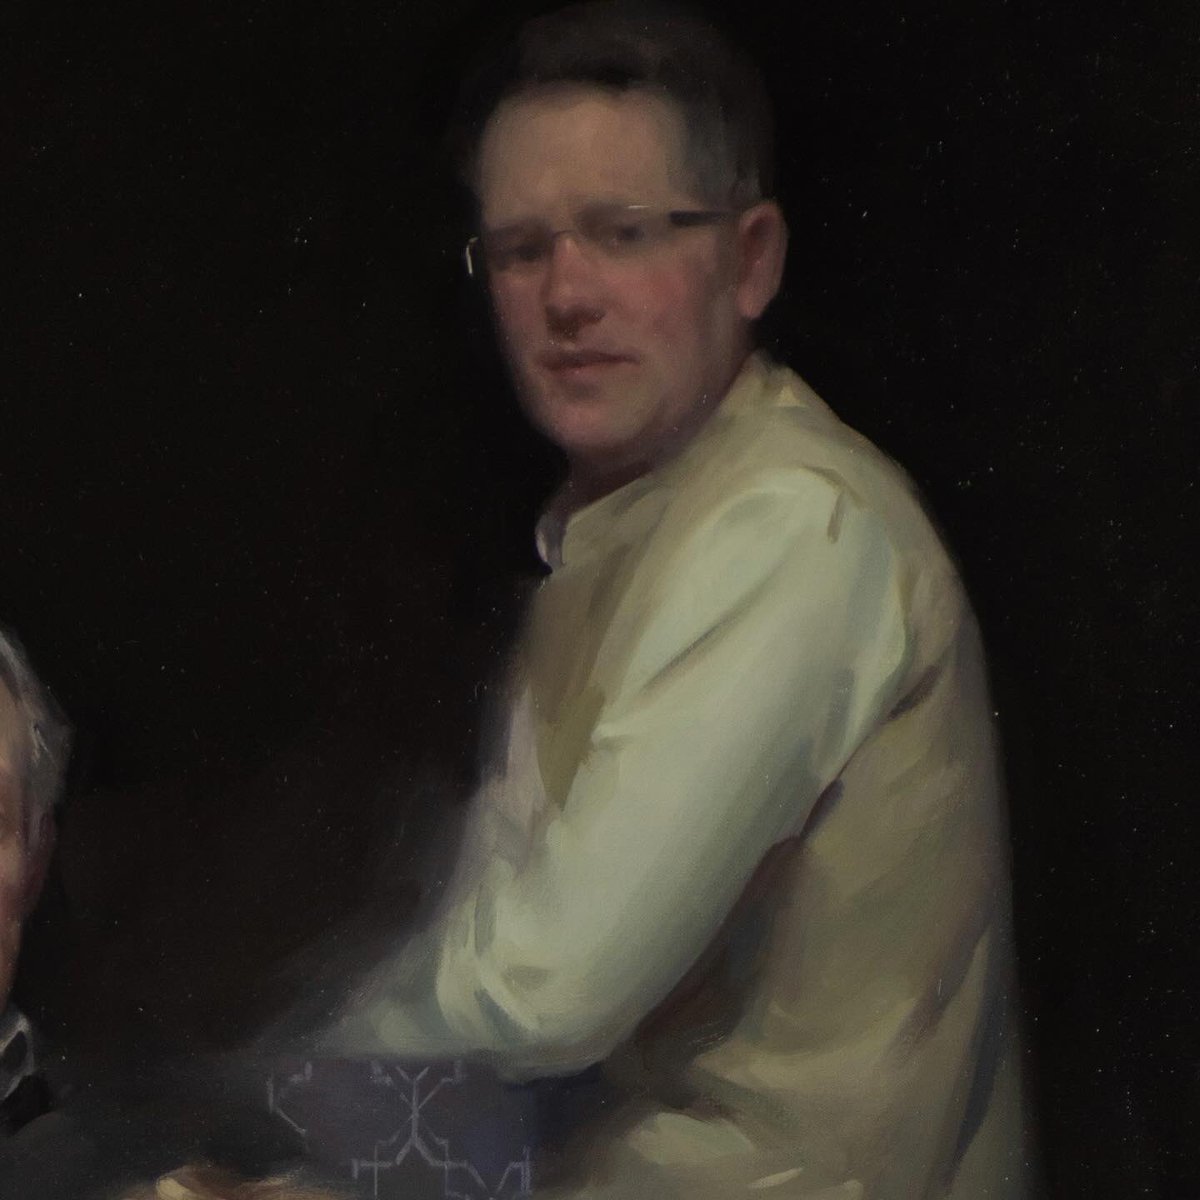 There is something about having your elders around during a rapid phase of growth, pressing on through childhood especially, that makes a tender subject to paint.
#portrait #familyportrait #conversationpiece #oilportrait #oilpainting #artoftheday